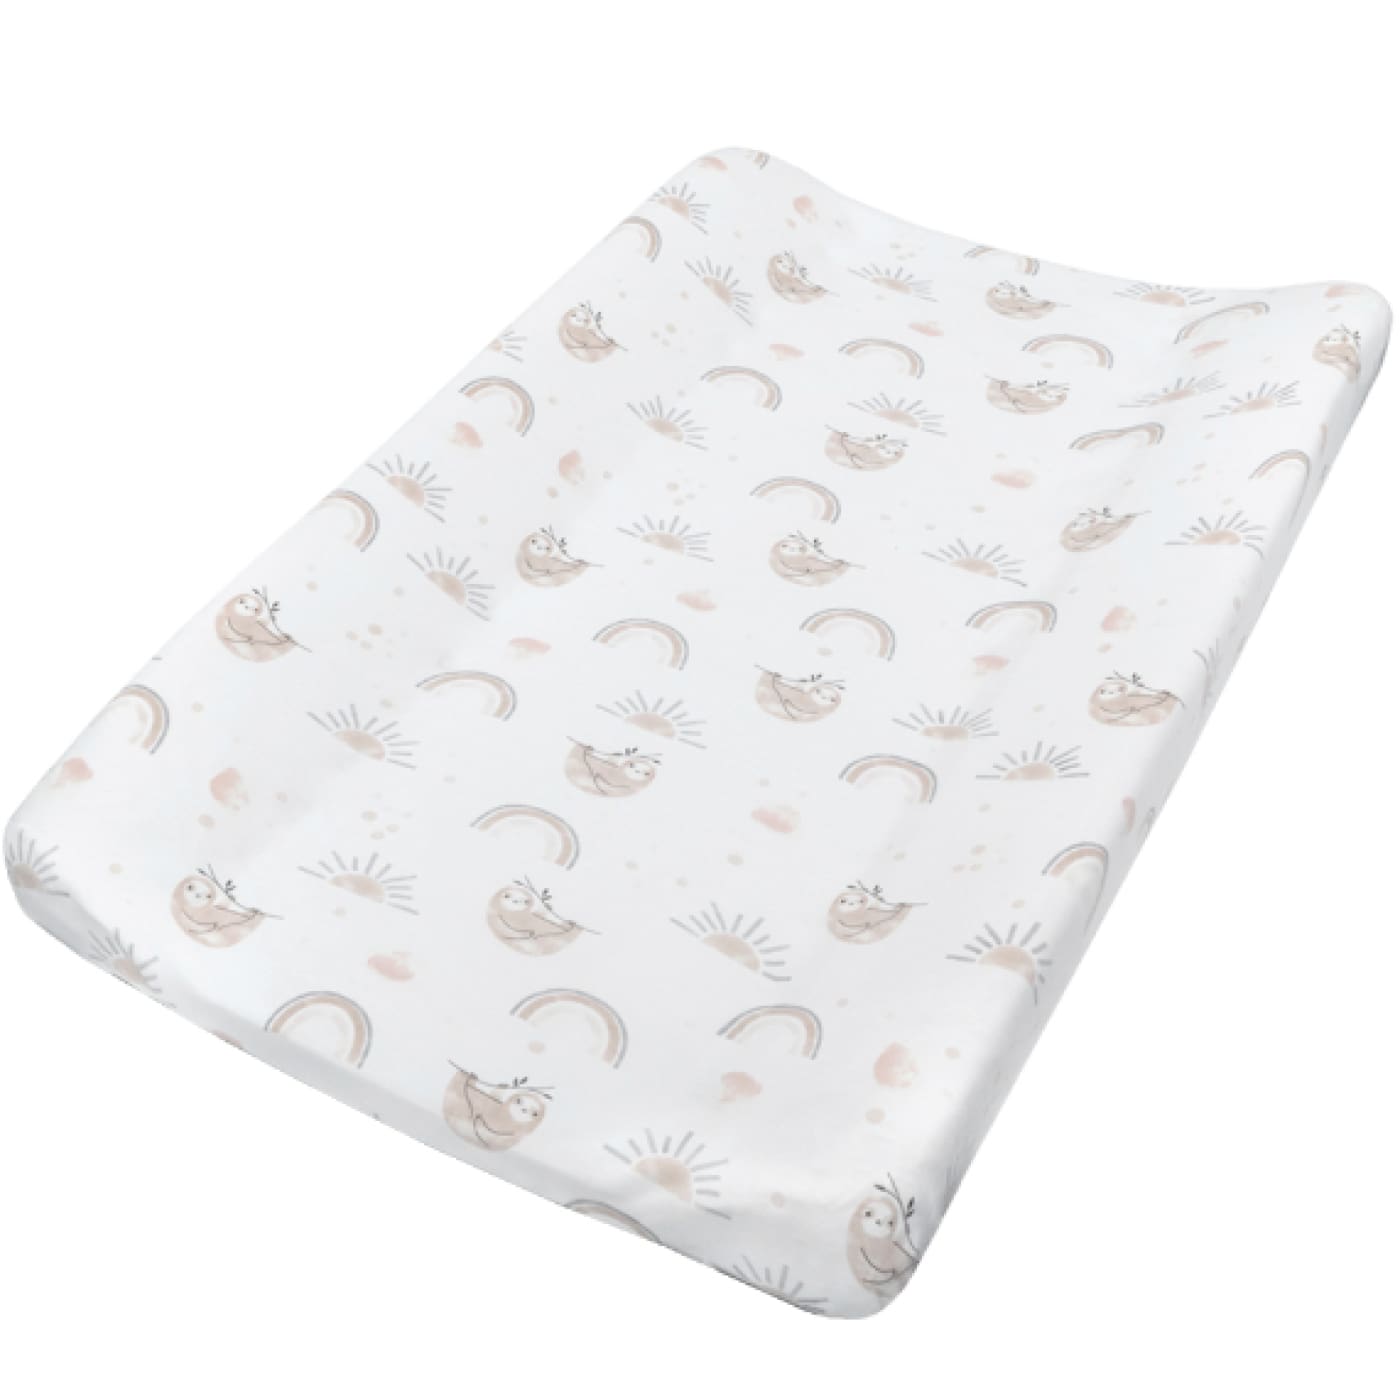 Living Textiles Jersey Change Pad Cover & Liner Set - Happy Sloth - Happy Sloth - BATHTIME & CHANGING - CHANGE MATS/COVERS